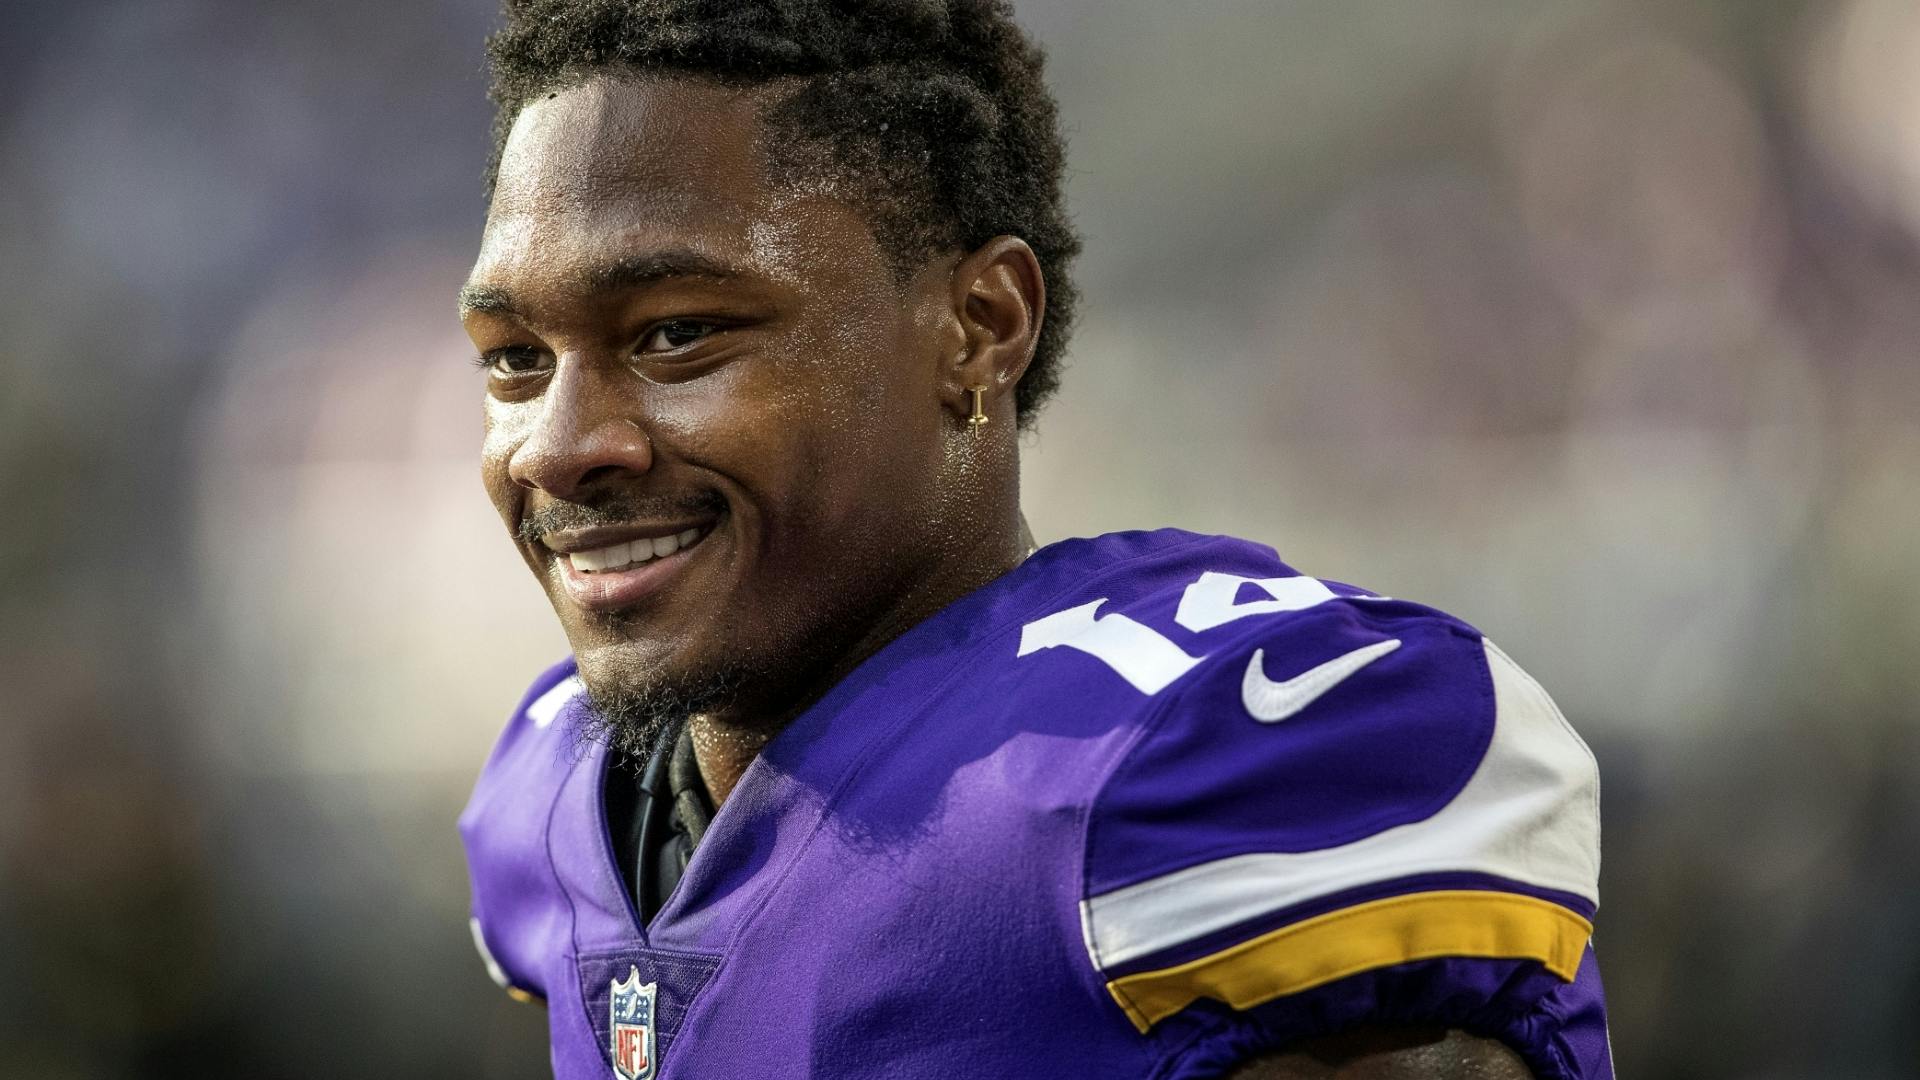 Stefon Diggs talked with the media Thursday at Winter Park.